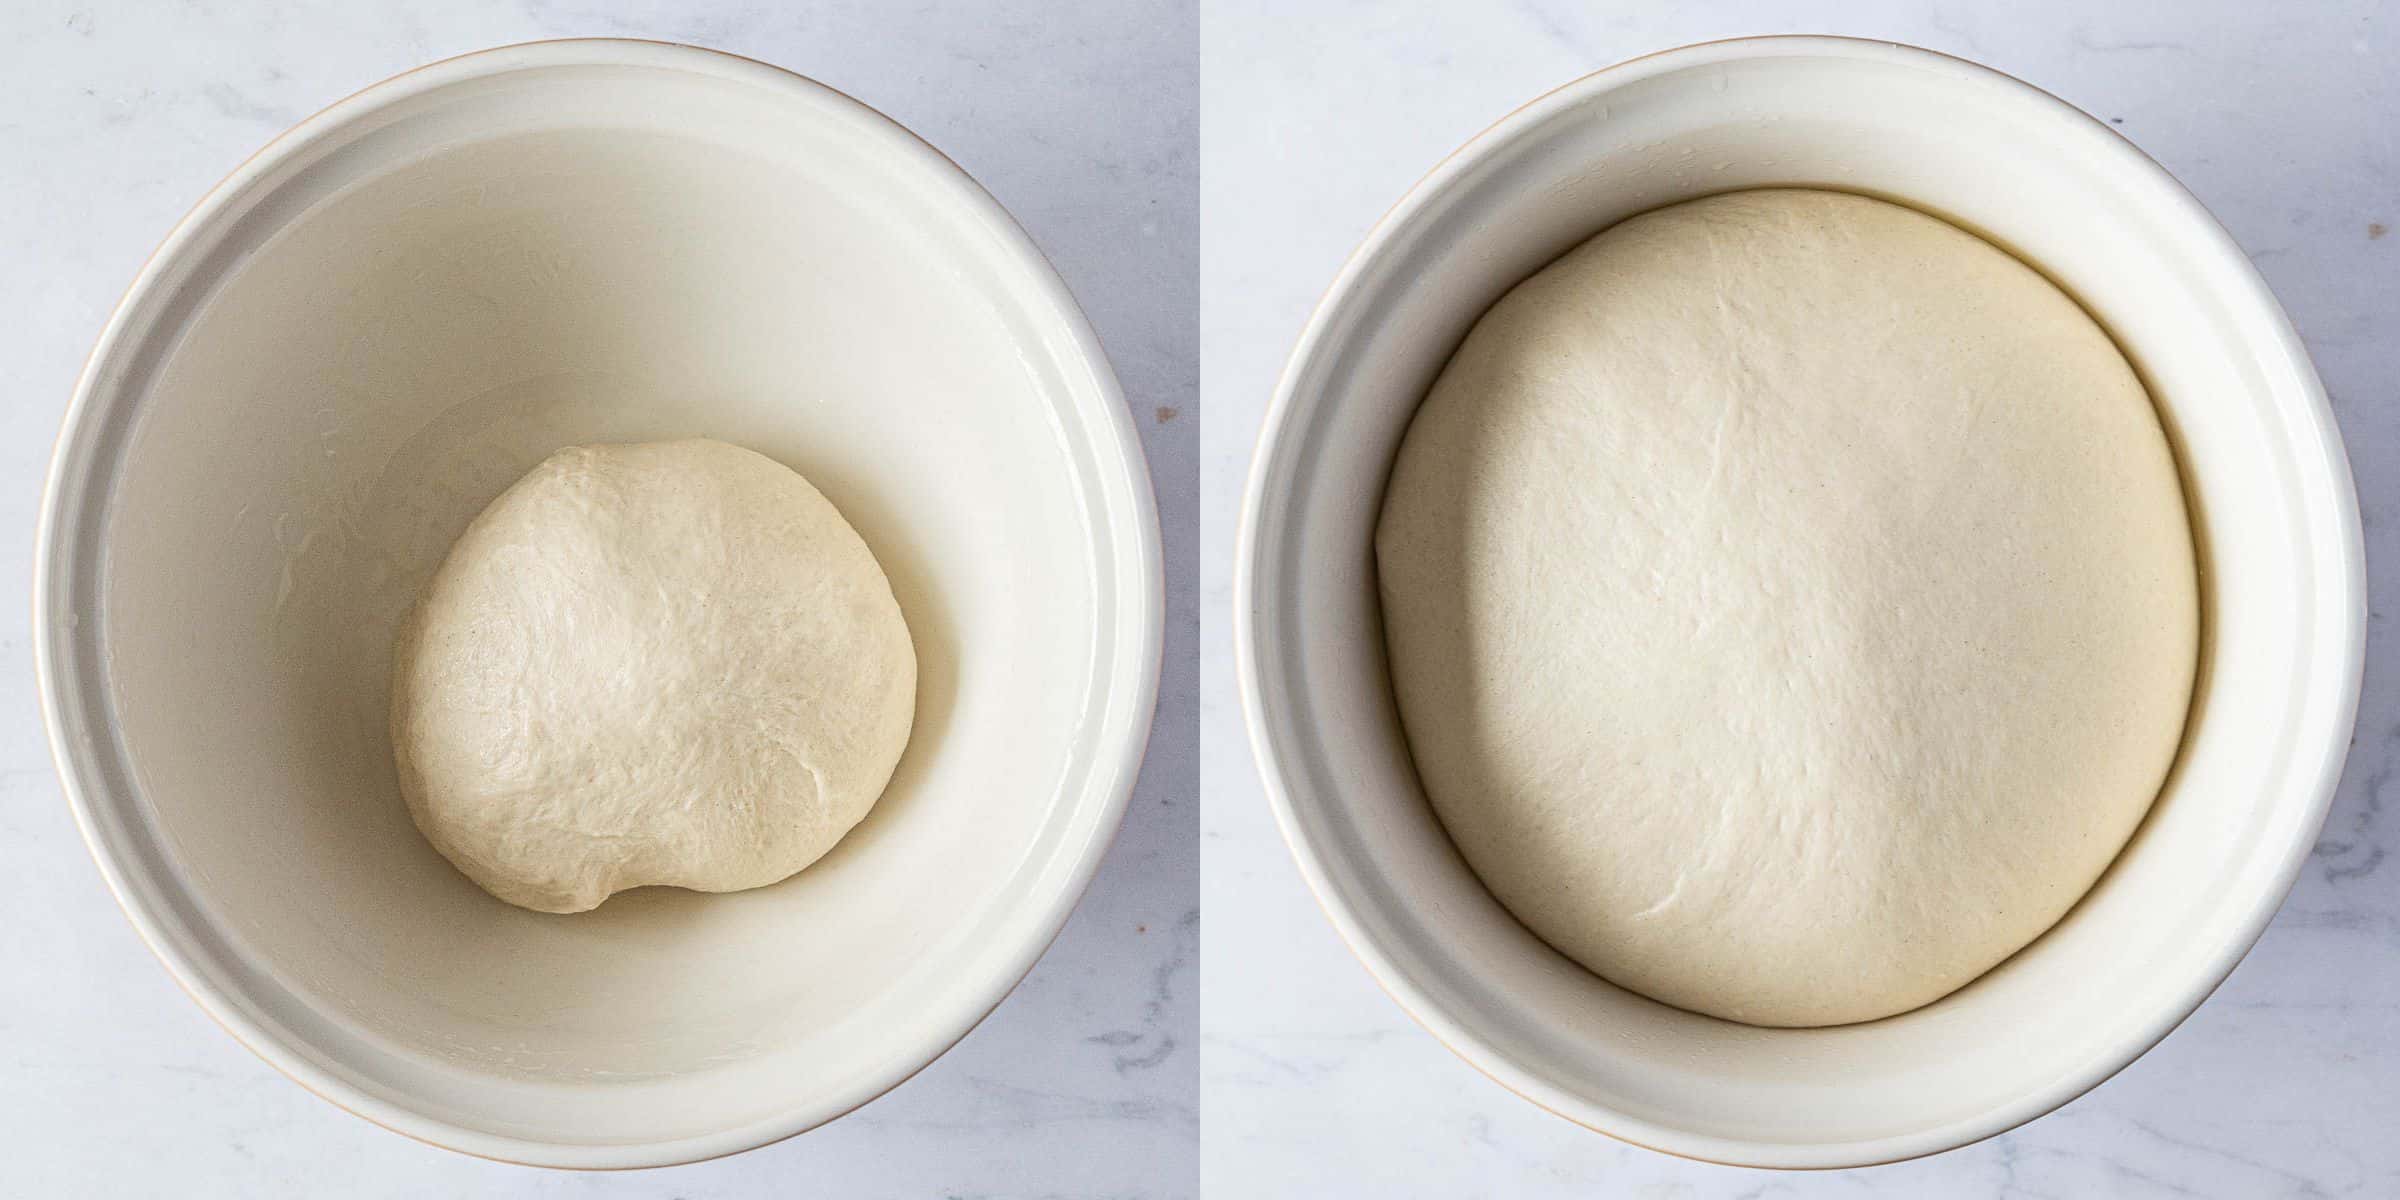 Step 2, a 2 image collage of the dough before and after rising.